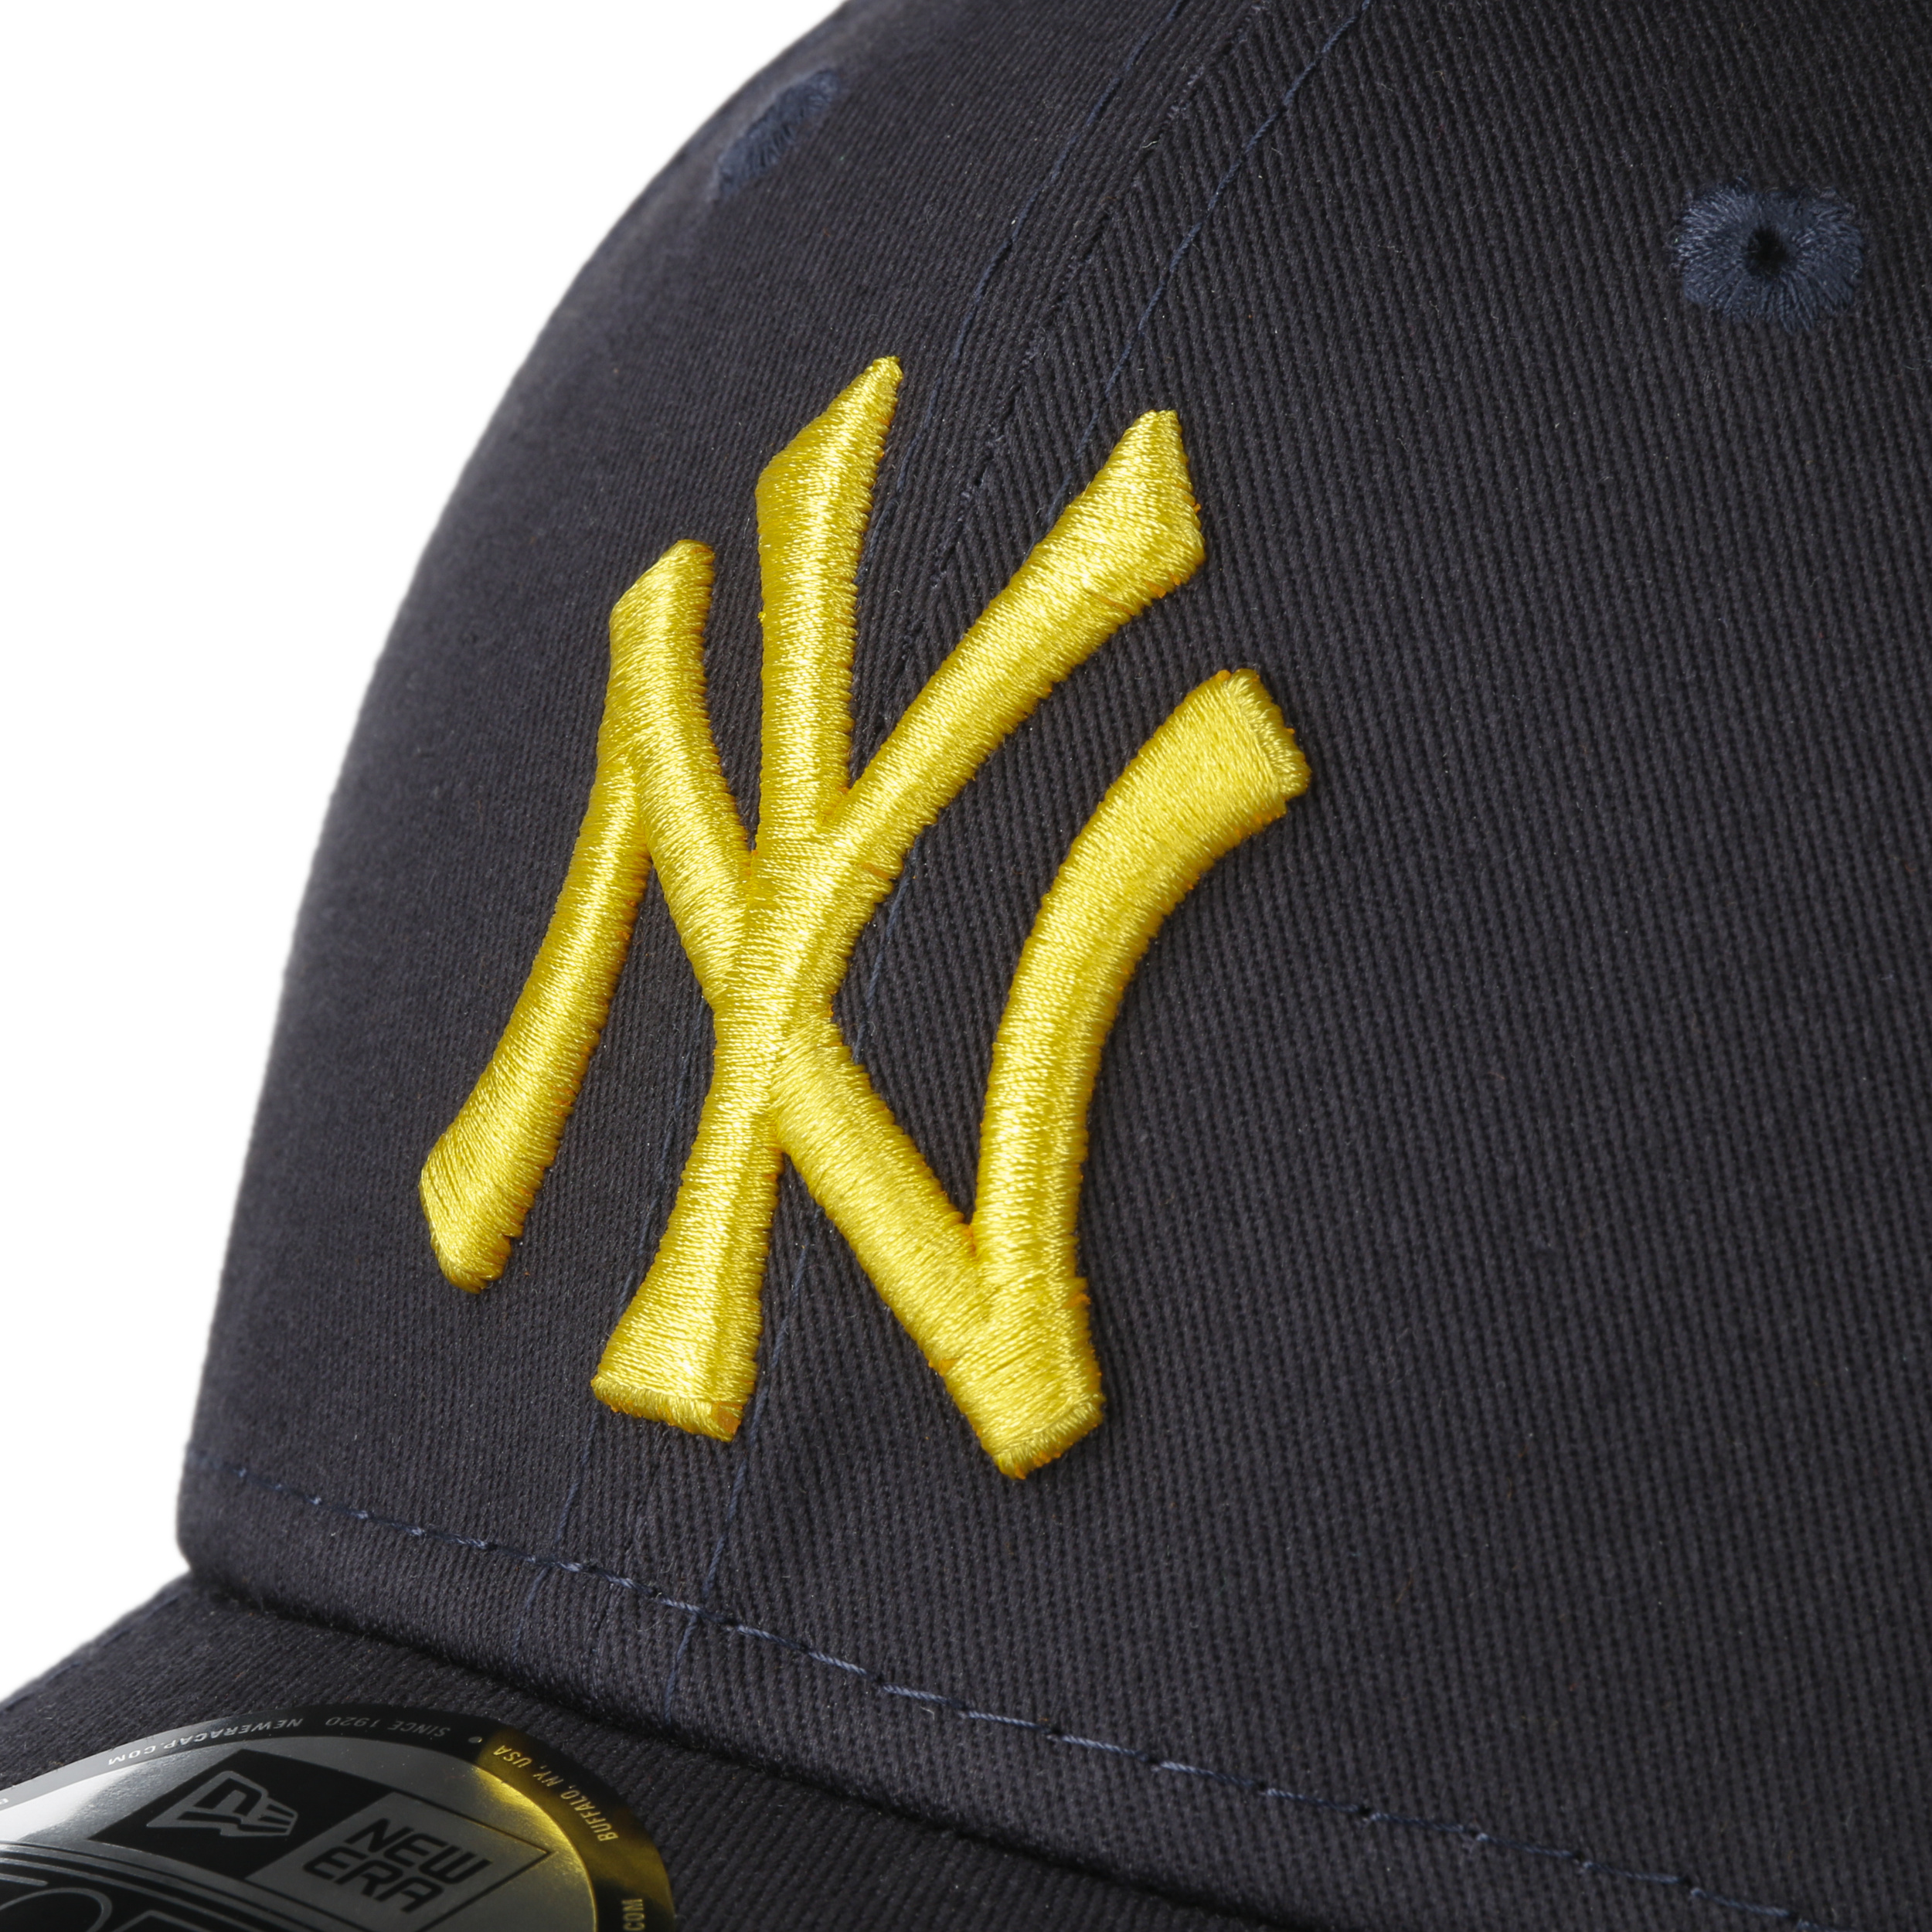 Casquette - New York Yankees - Black and Gold - 9Forty